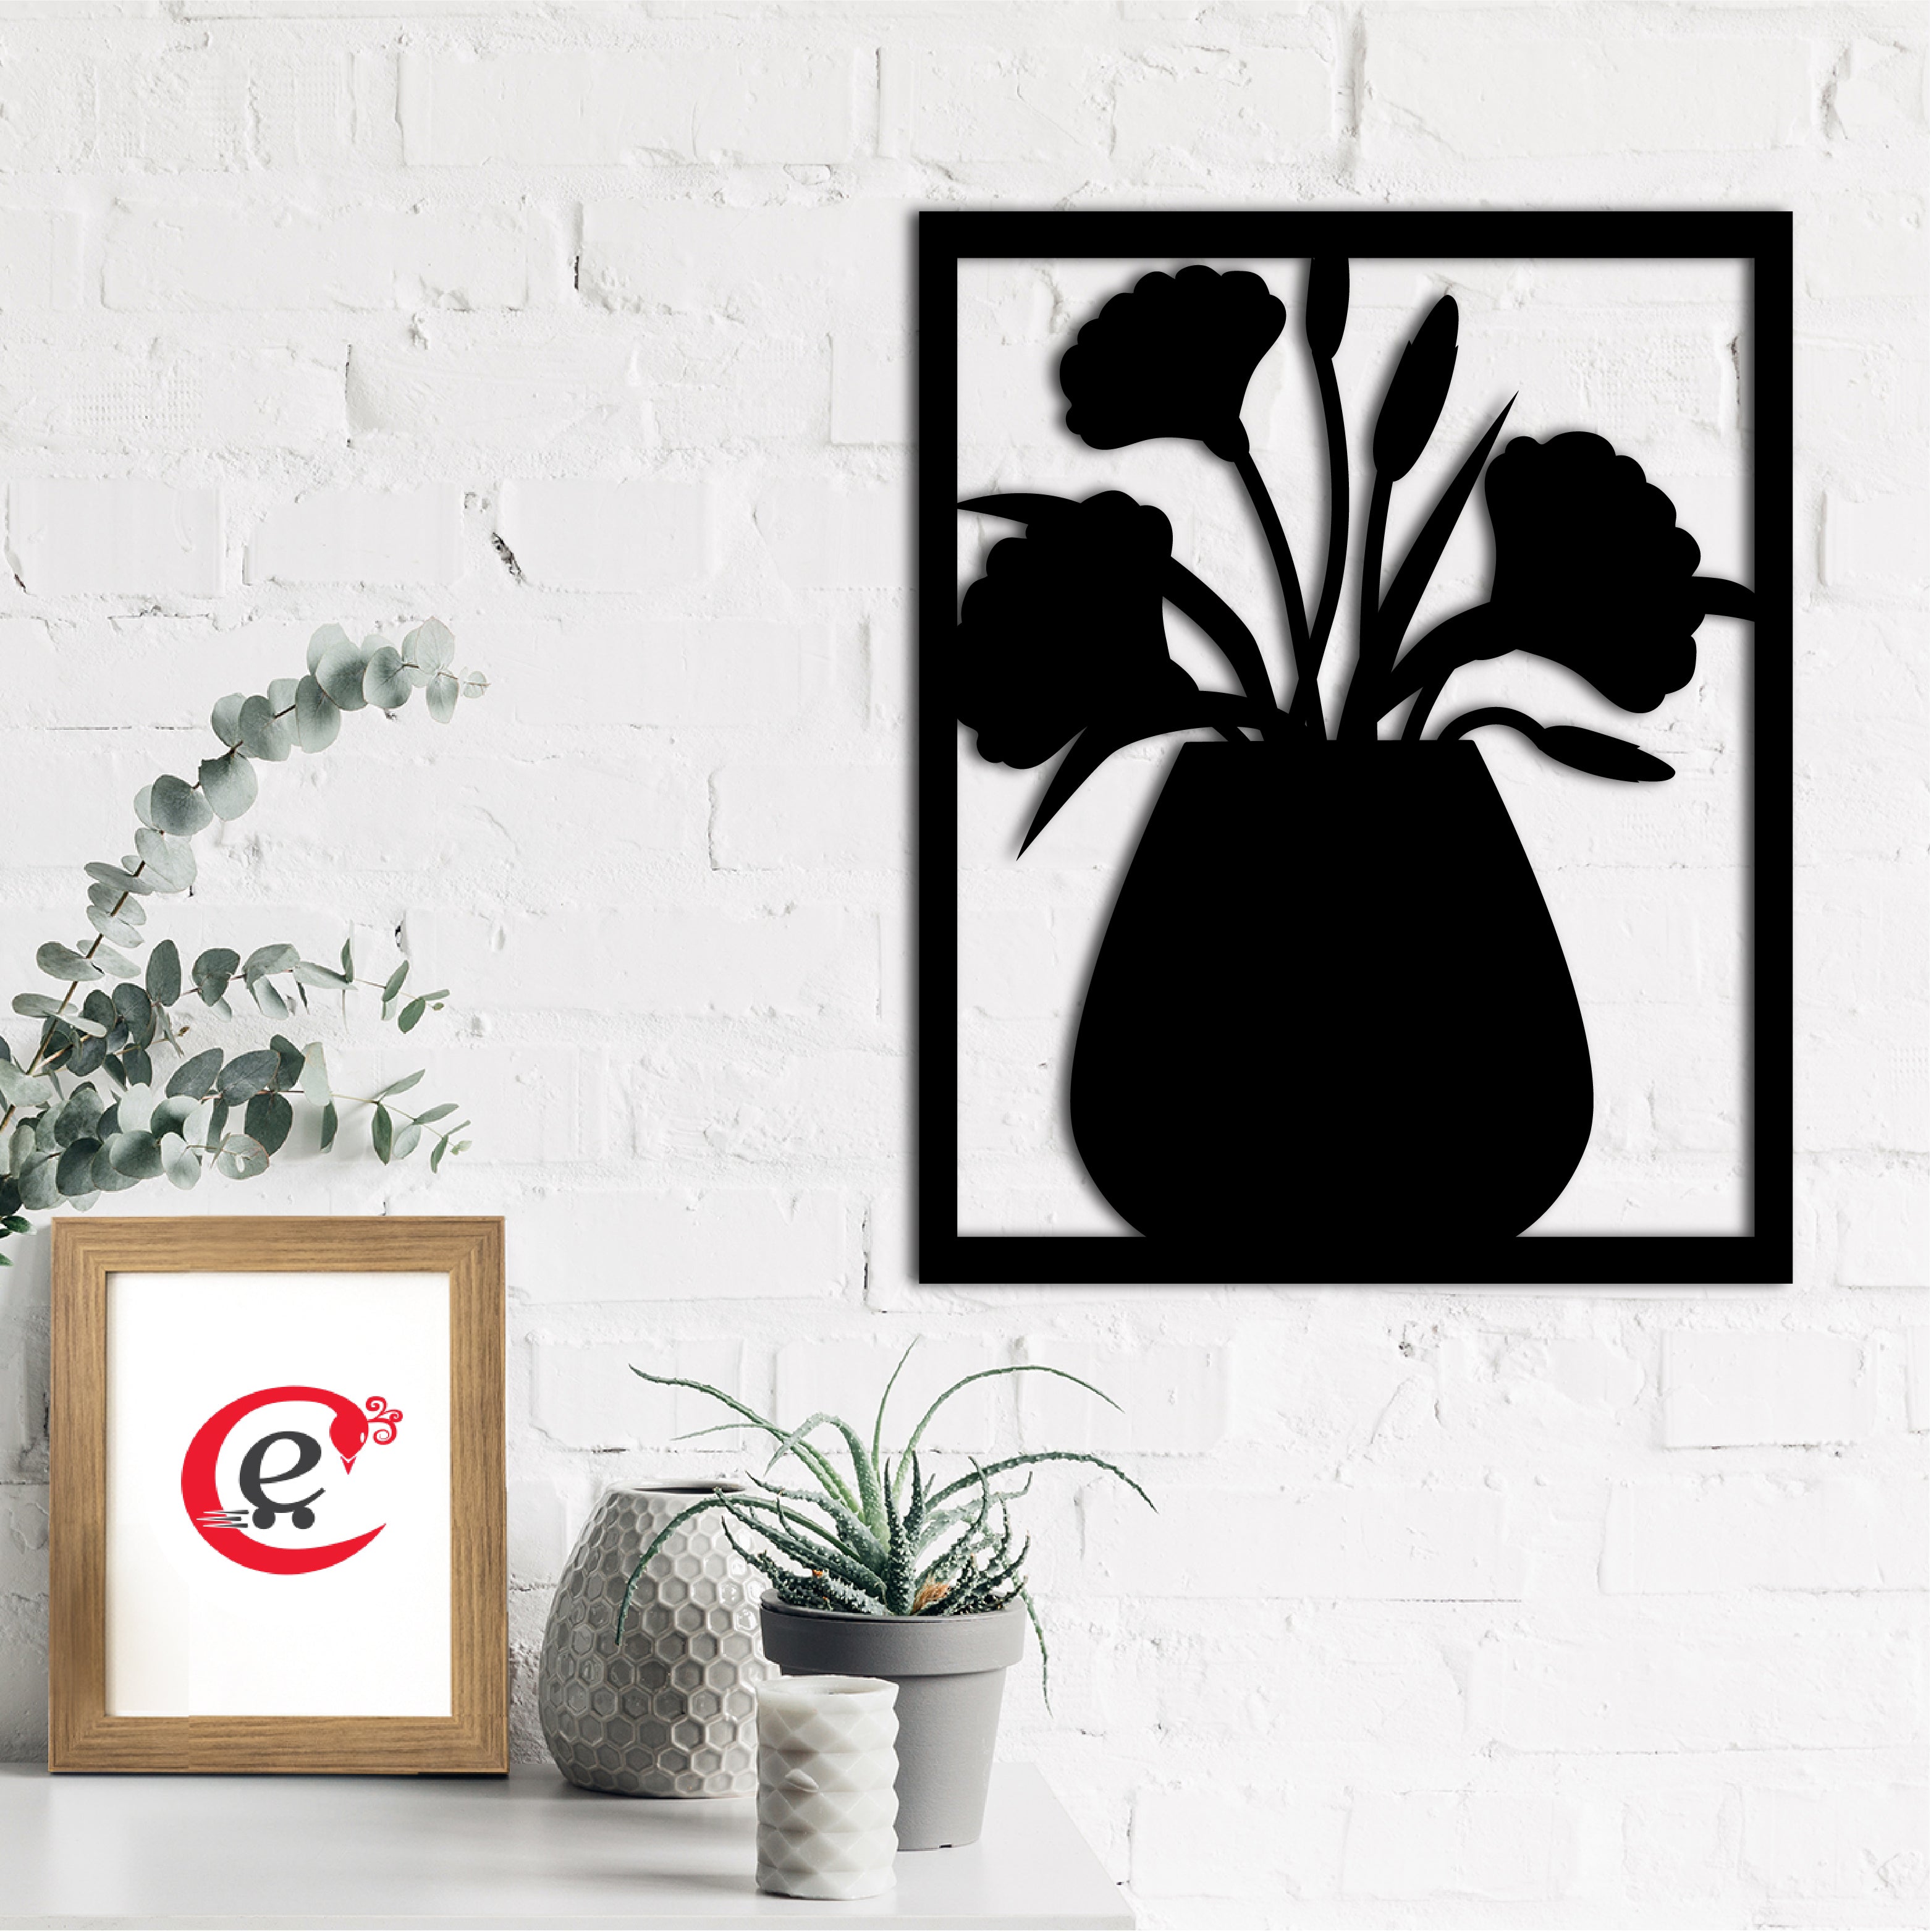 Flower Vase Frame Black Engineered Wood Wall Art Cutout, Ready To Hang Home Decor